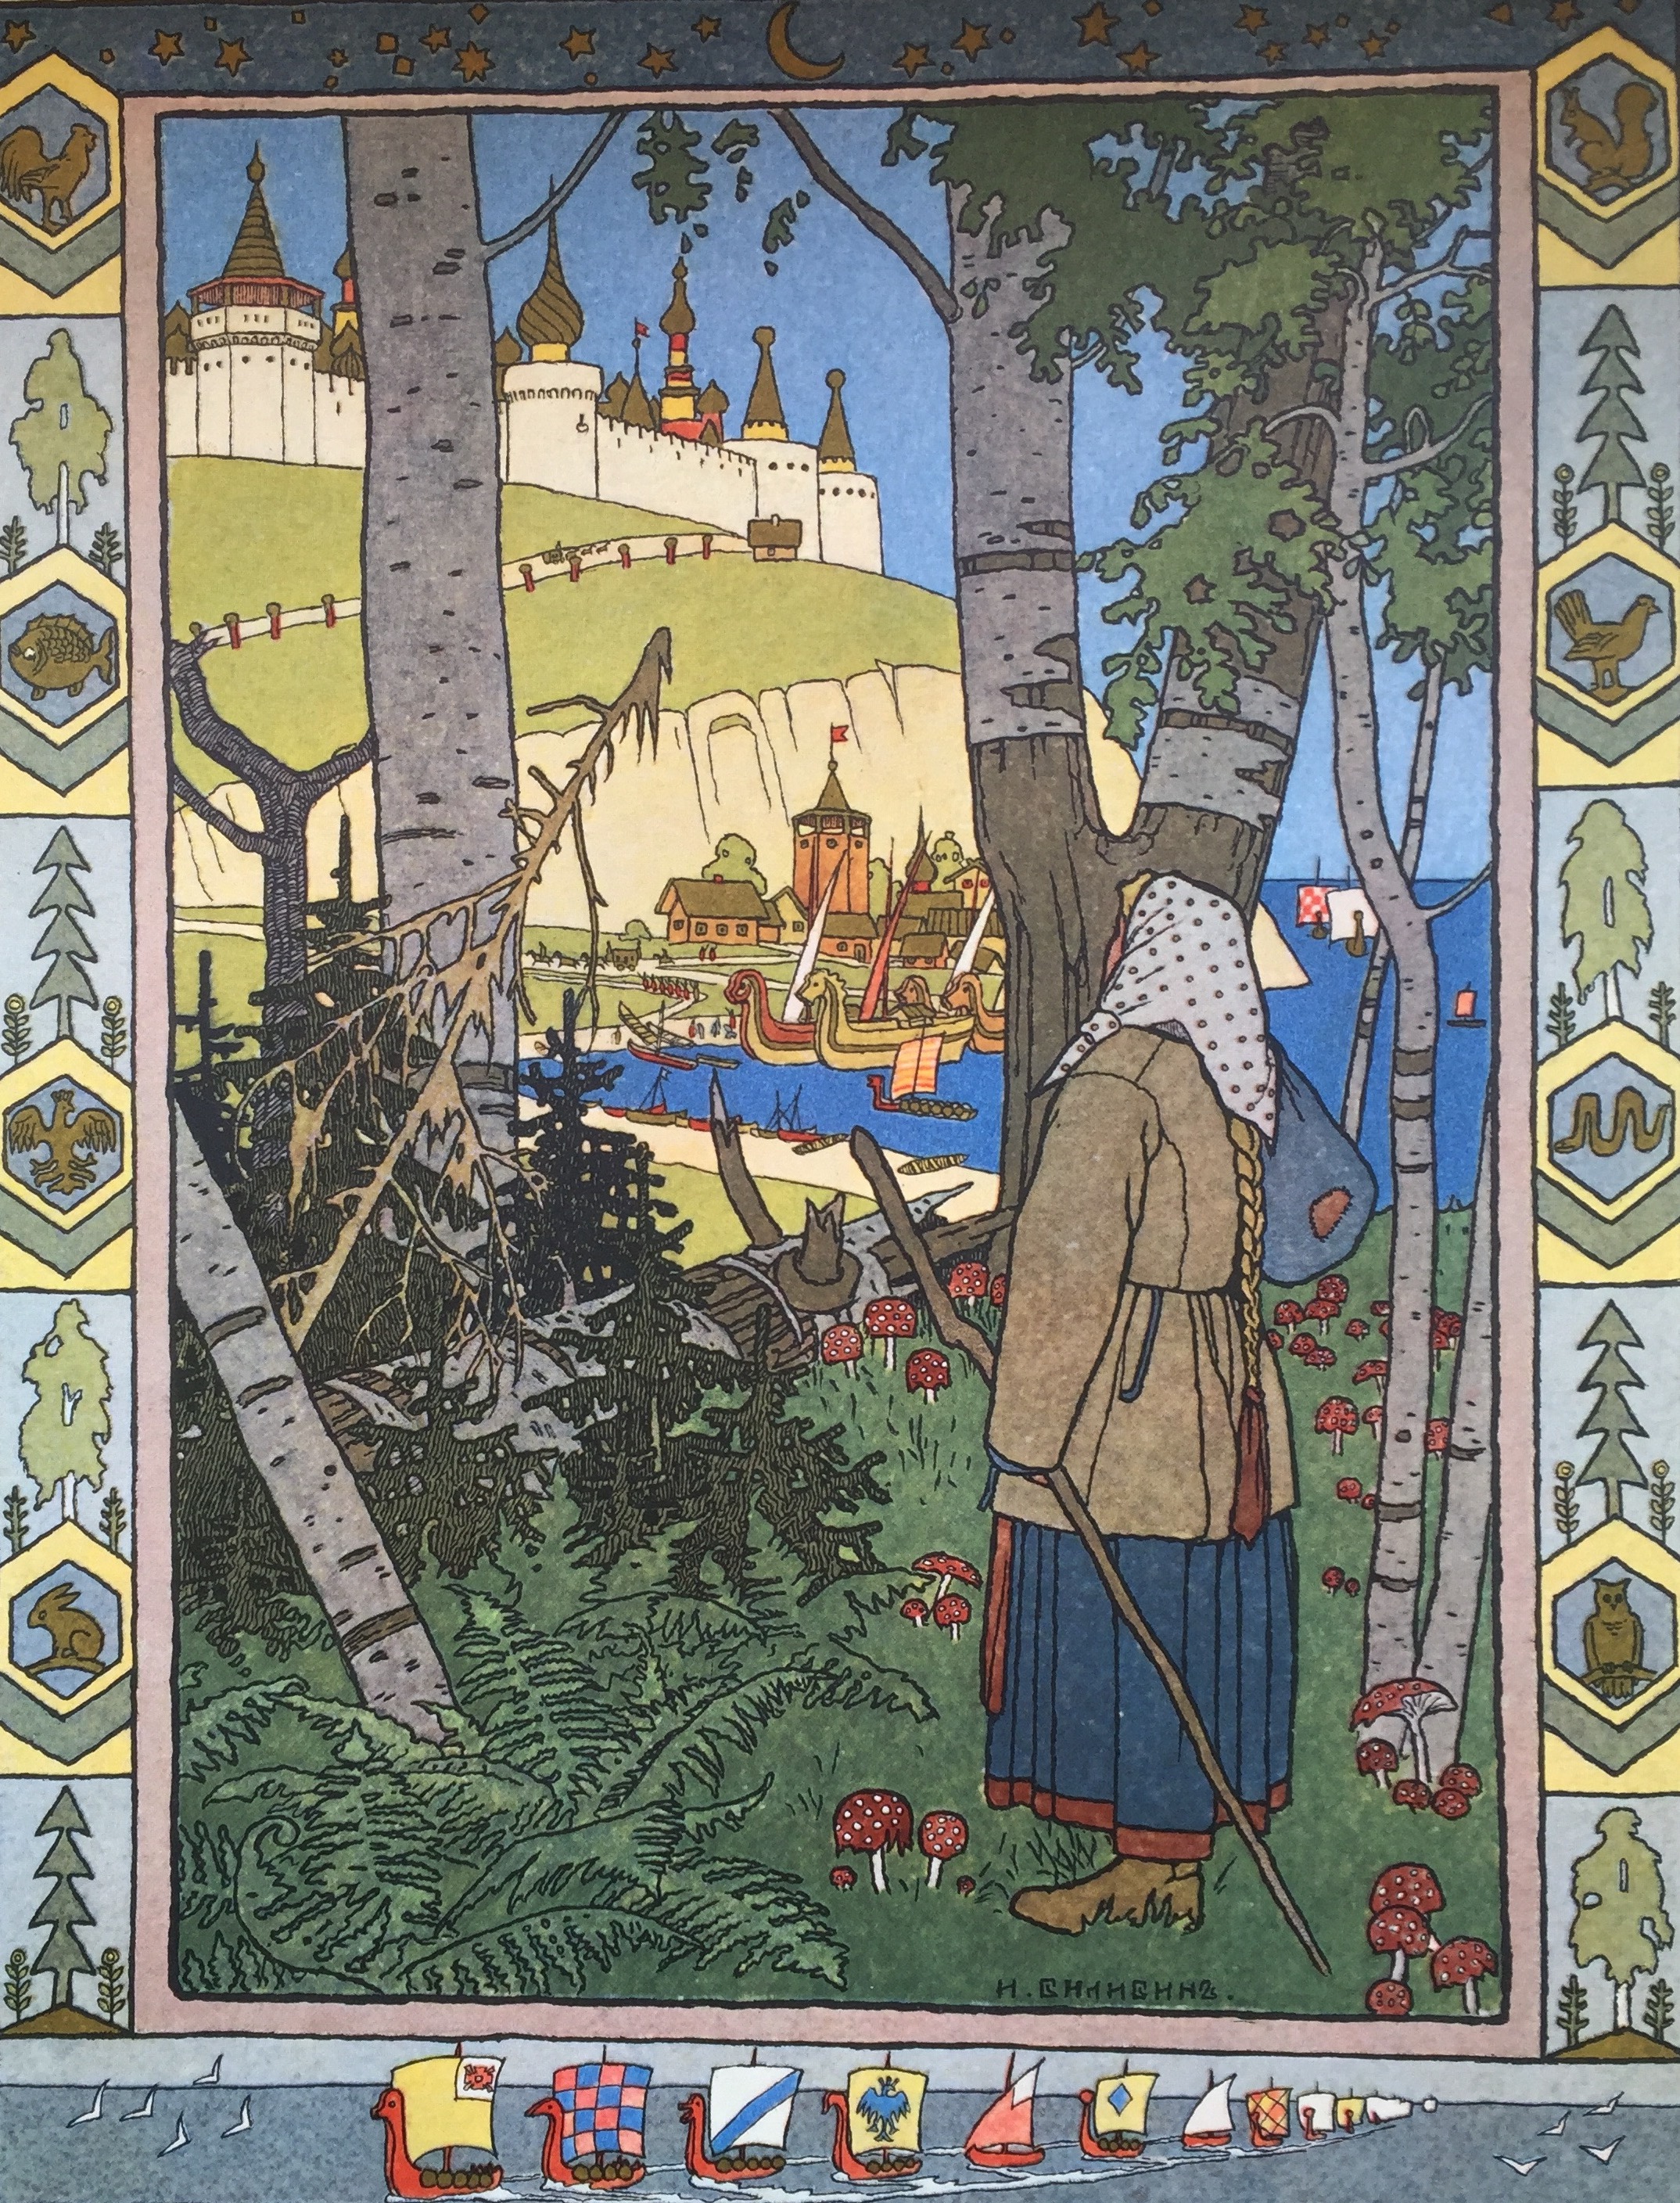 The bride of Finist the Falcon has almost completed her journey. From The Feather of Finist the Falcon, a Russian Fairy Tale by Ivan Bilibin